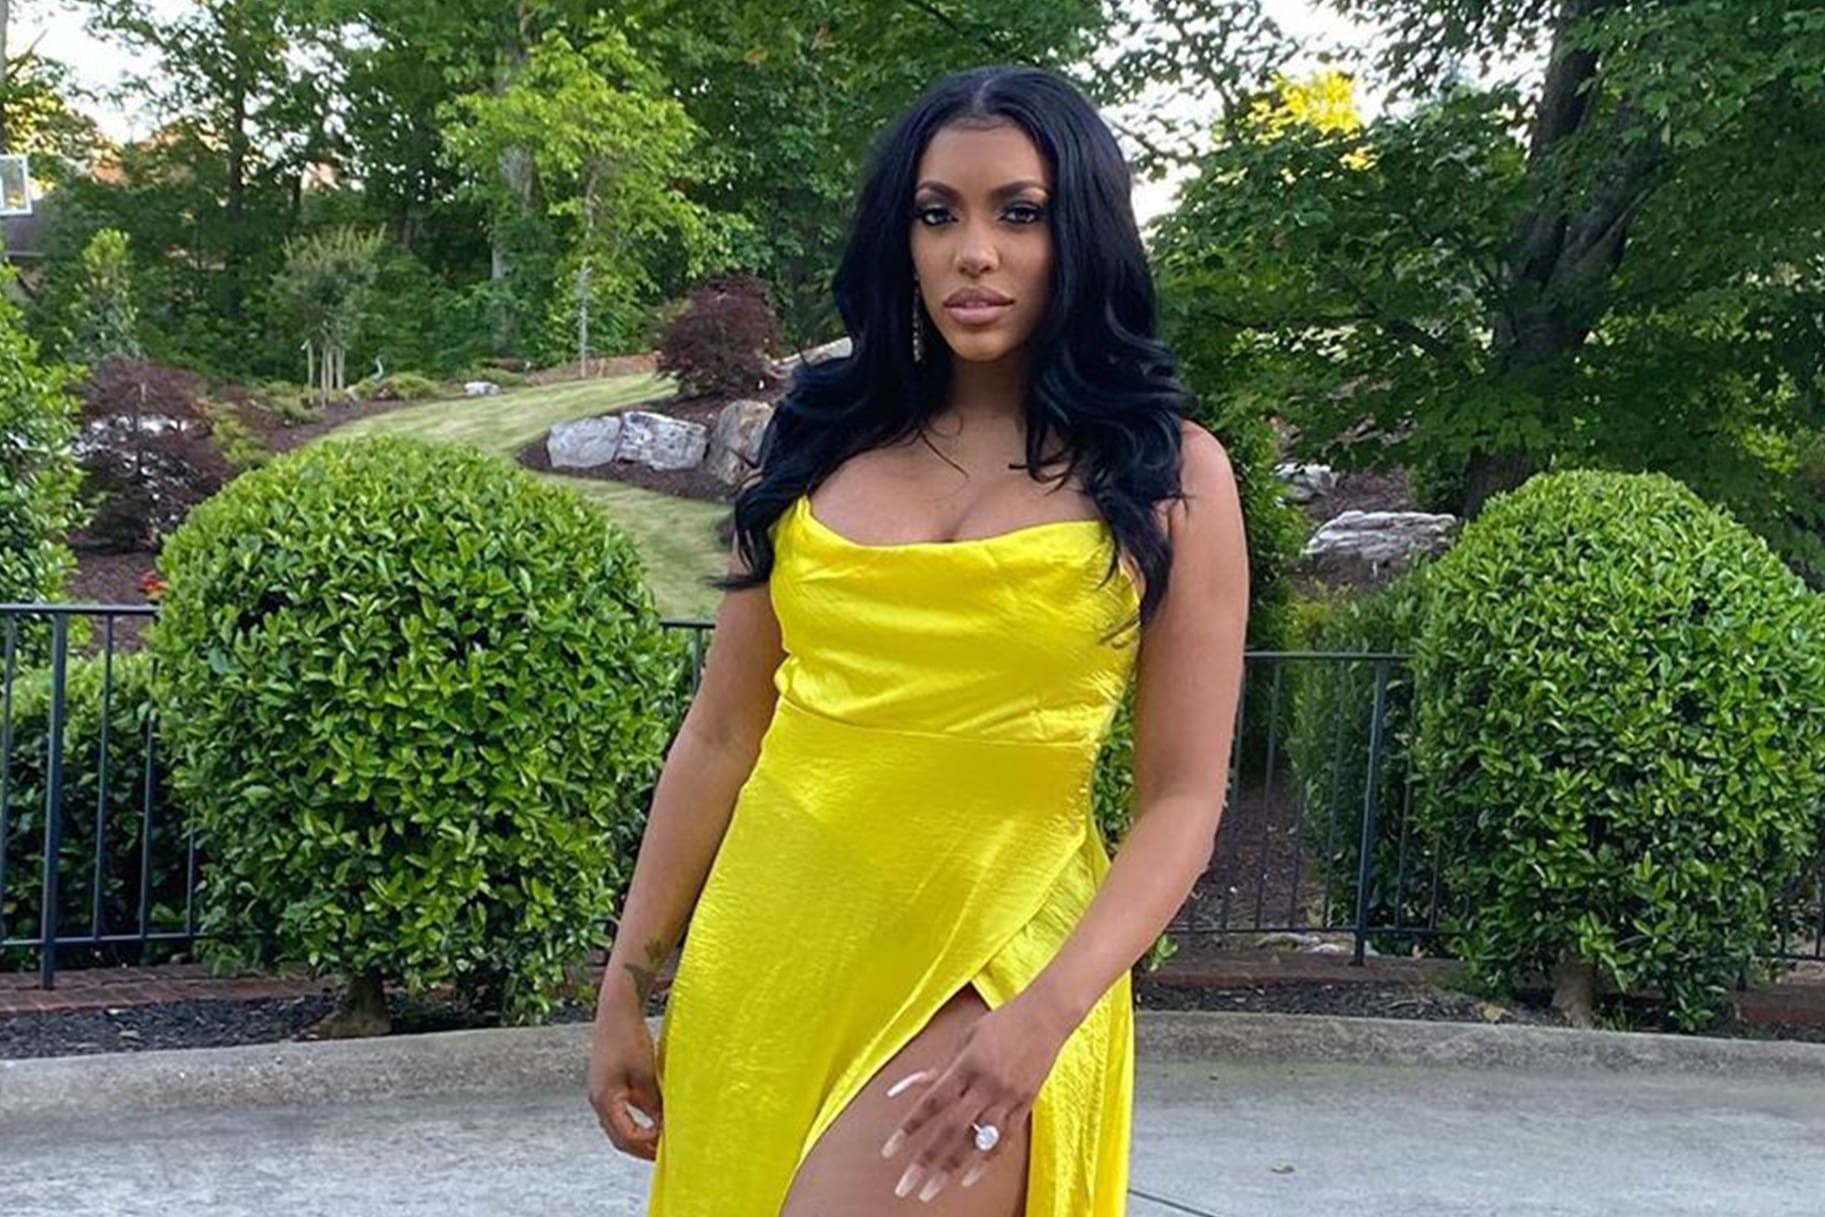 ”porsha-williams-fans-say-that-africa-looks-perfect-on-her-check-out-her-new-look”